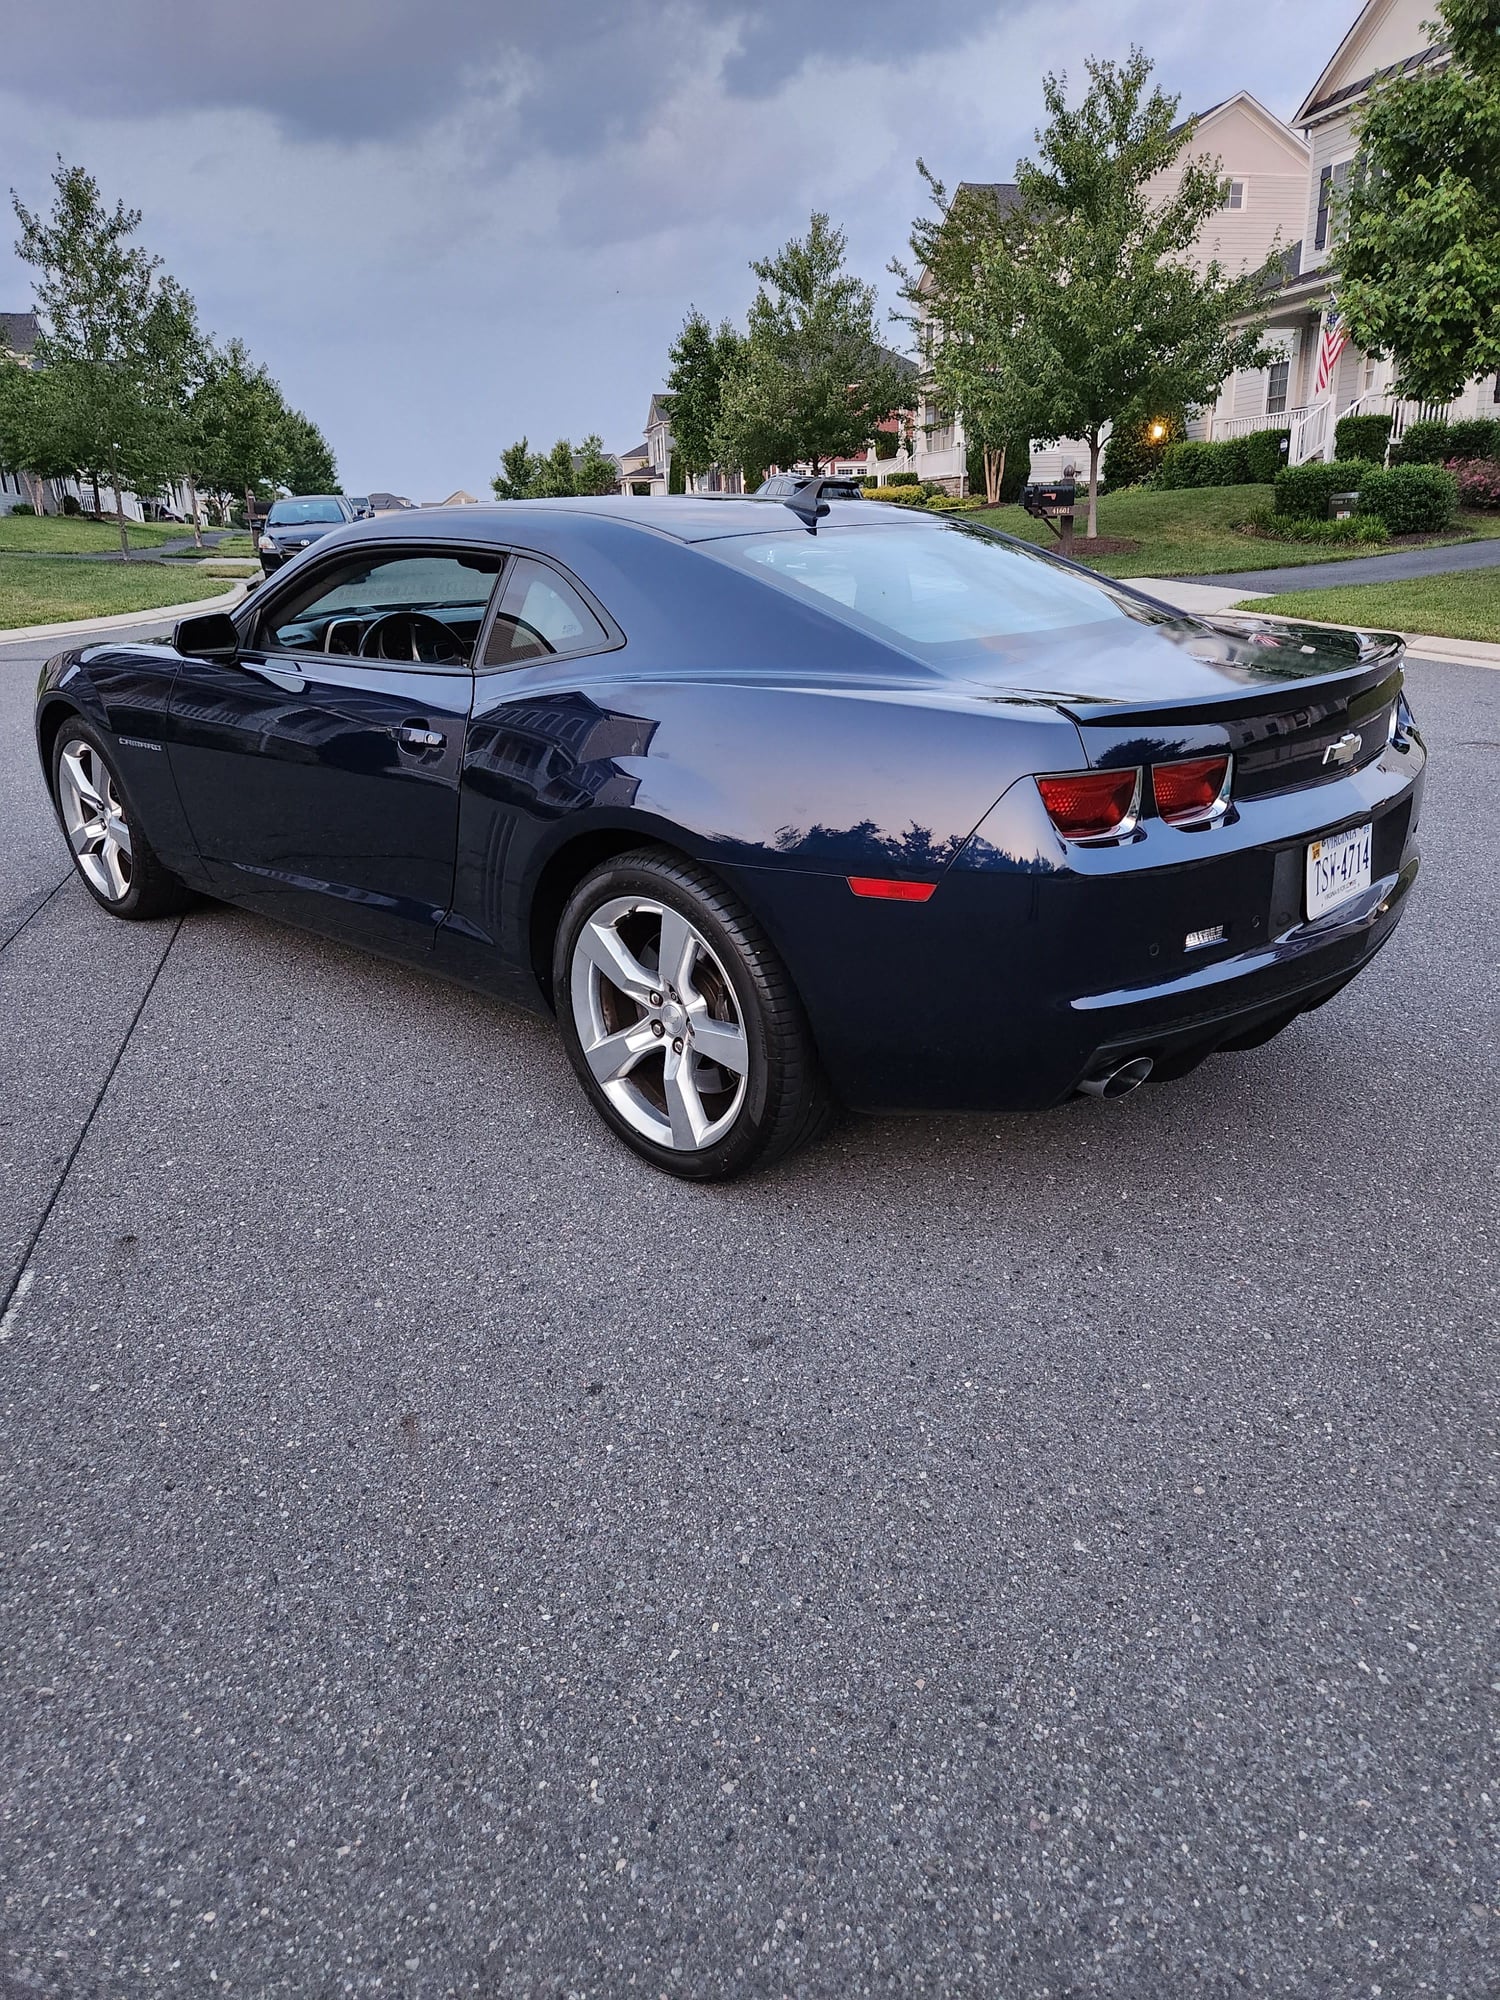 2010 Chevrolet Camaro - 2010 Camaro 2SS 6MT, 50k miles - Used - VIN 2G1FT1EW4A9203137 - 49,700 Miles - 8 cyl - 2WD - Manual - Coupe - Blue - Ashburn, VA 20148, United States